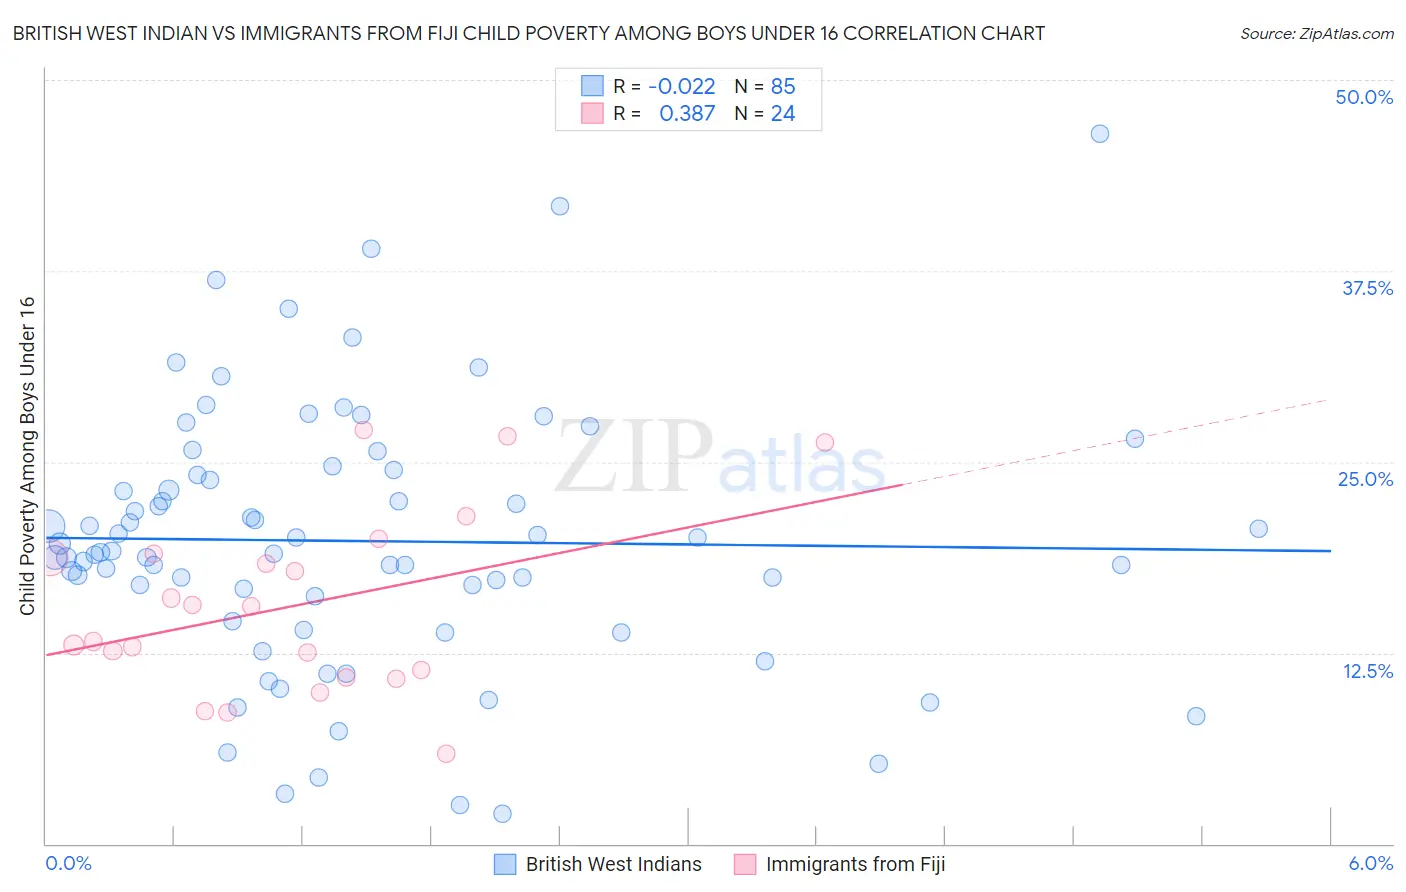 British West Indian vs Immigrants from Fiji Child Poverty Among Boys Under 16